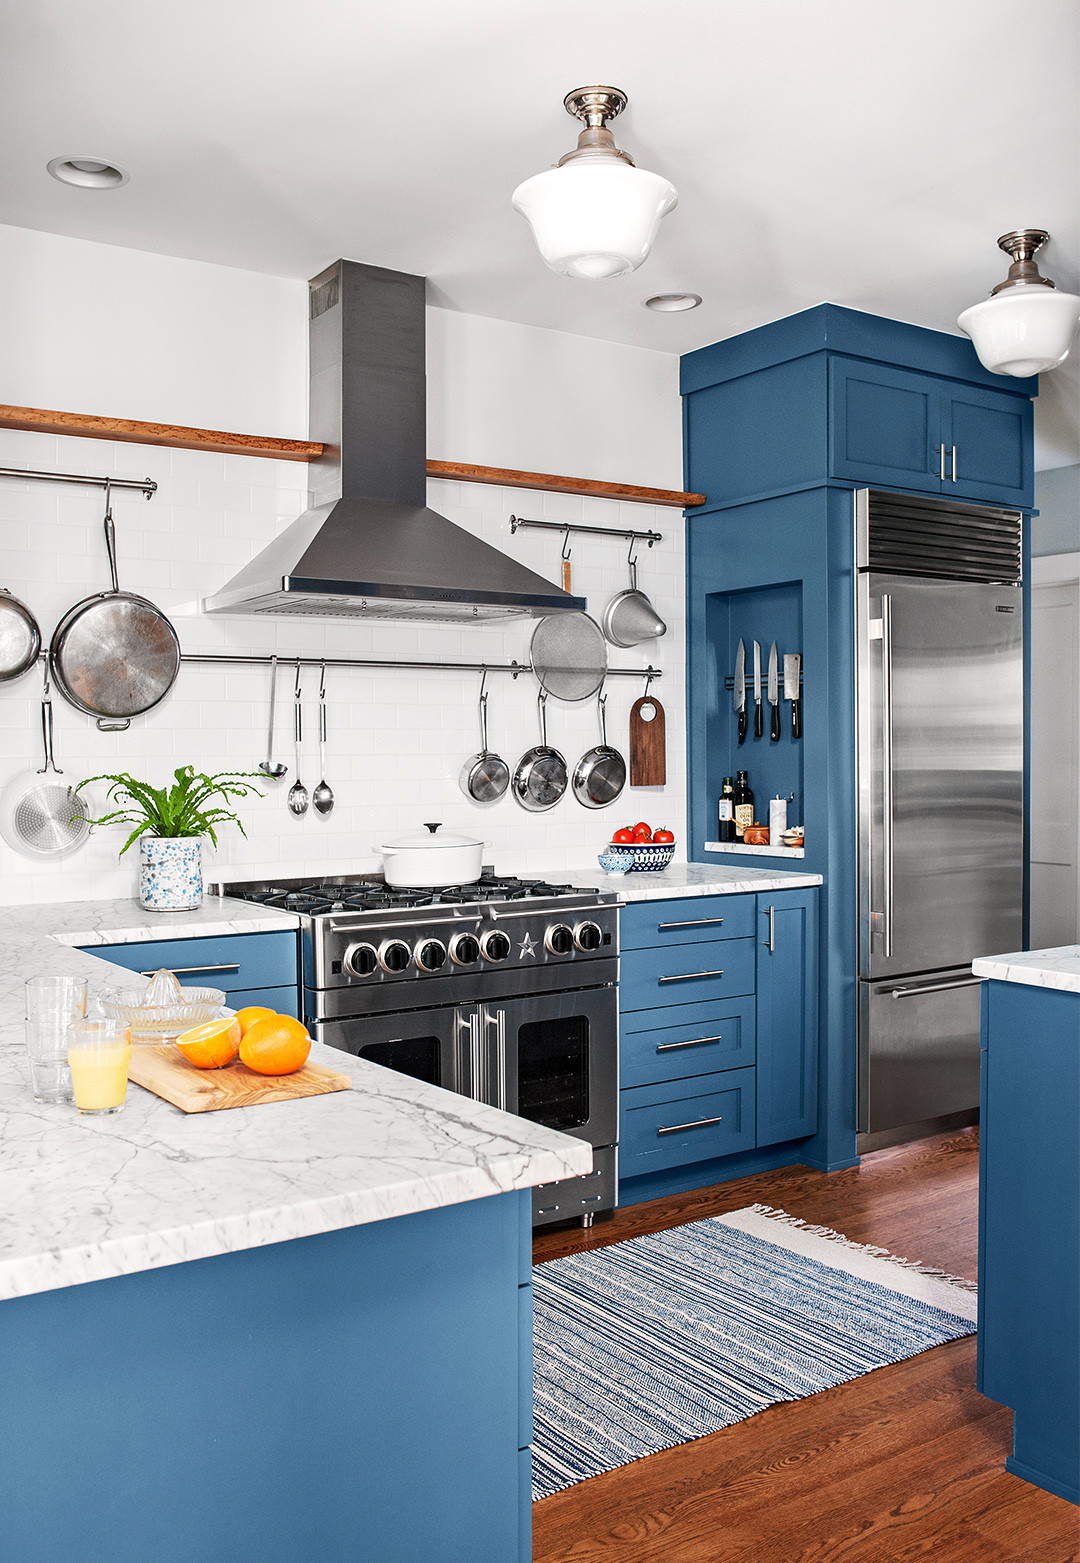 Kitchen Wall Colors 2020
 Kitchen Trends that are Here to Stay